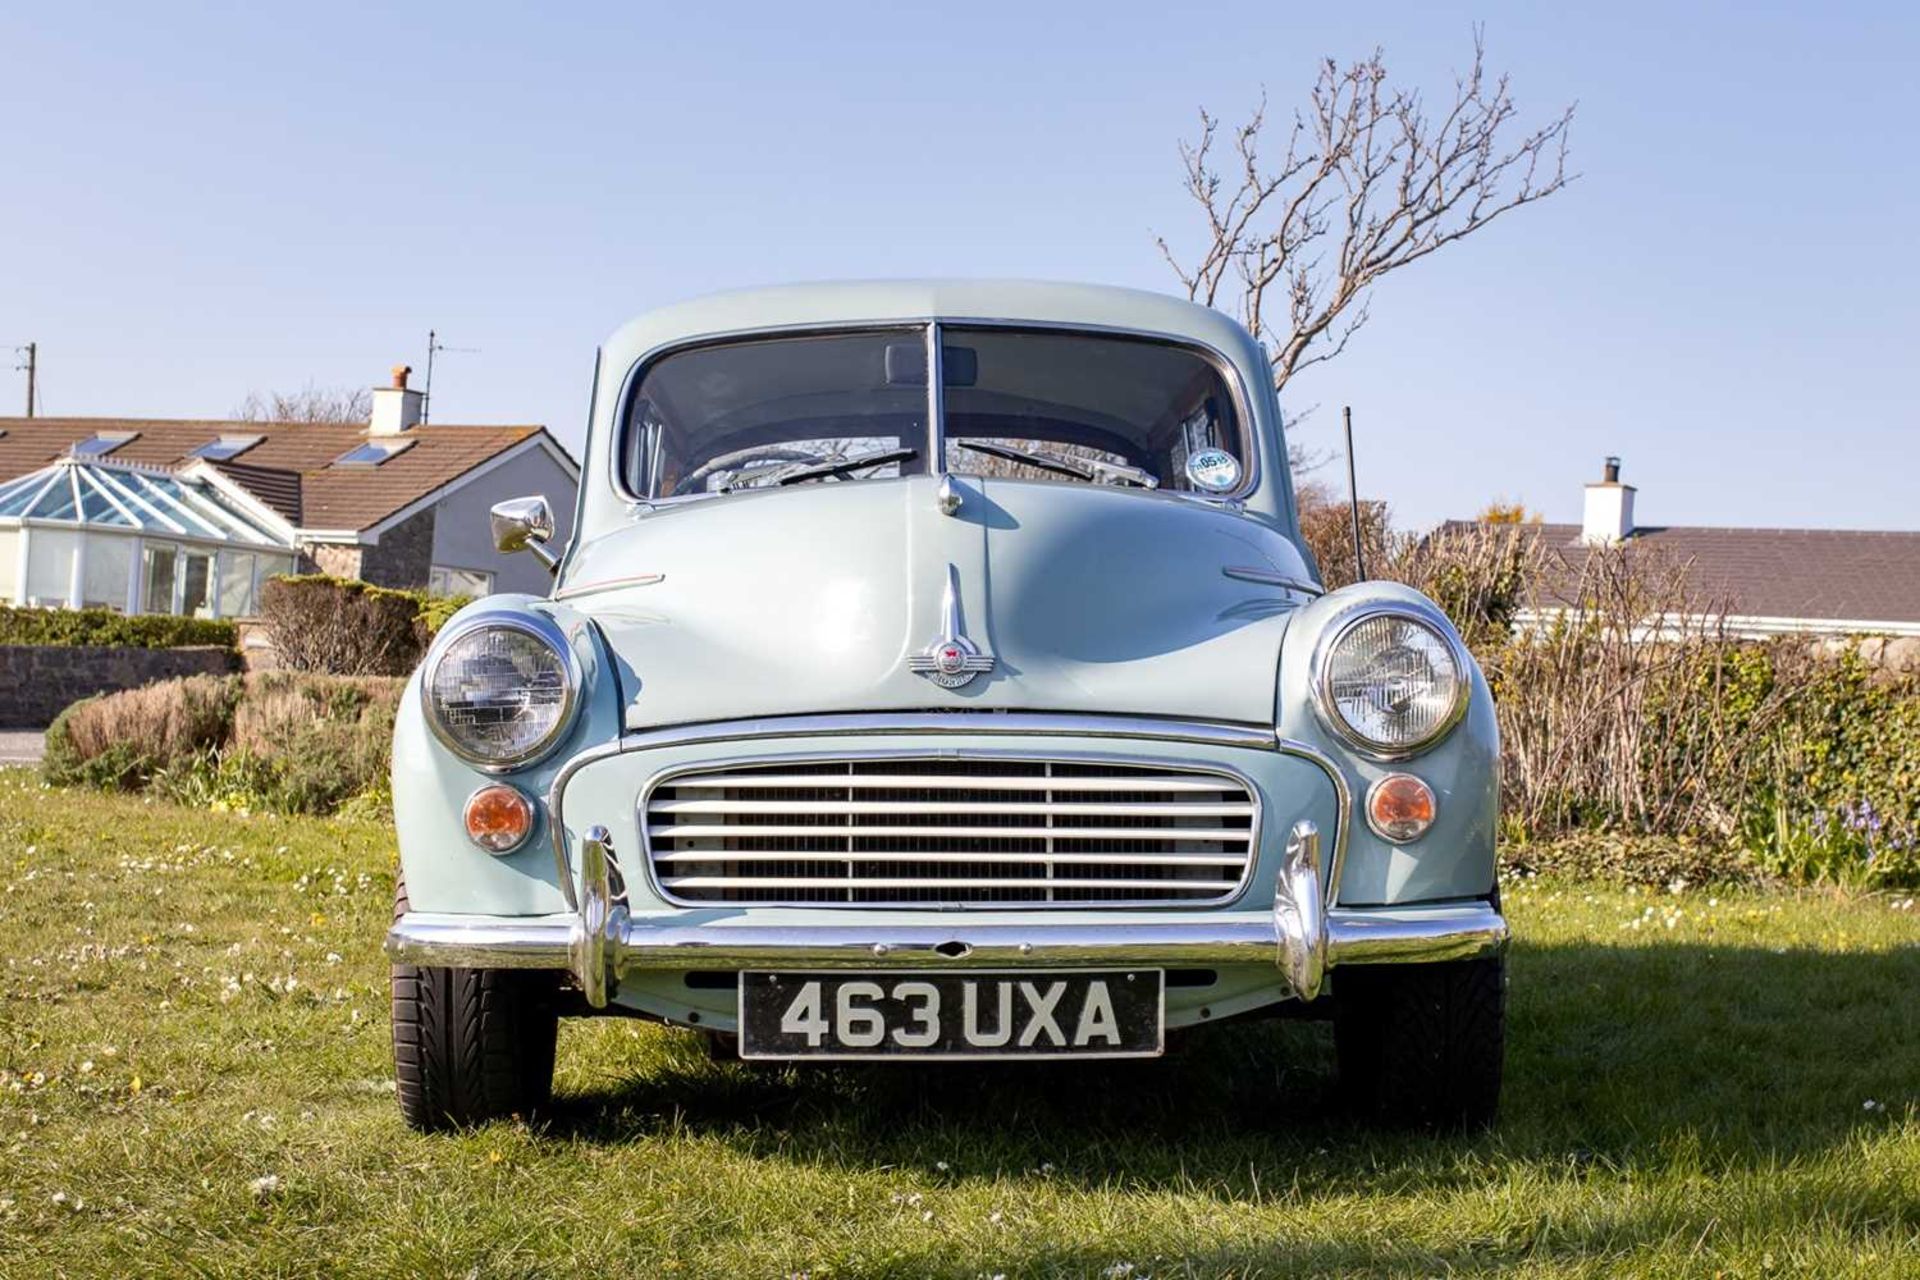 1956 Morris Minor Traveller Uprated with 1275cc engine  - Image 26 of 89